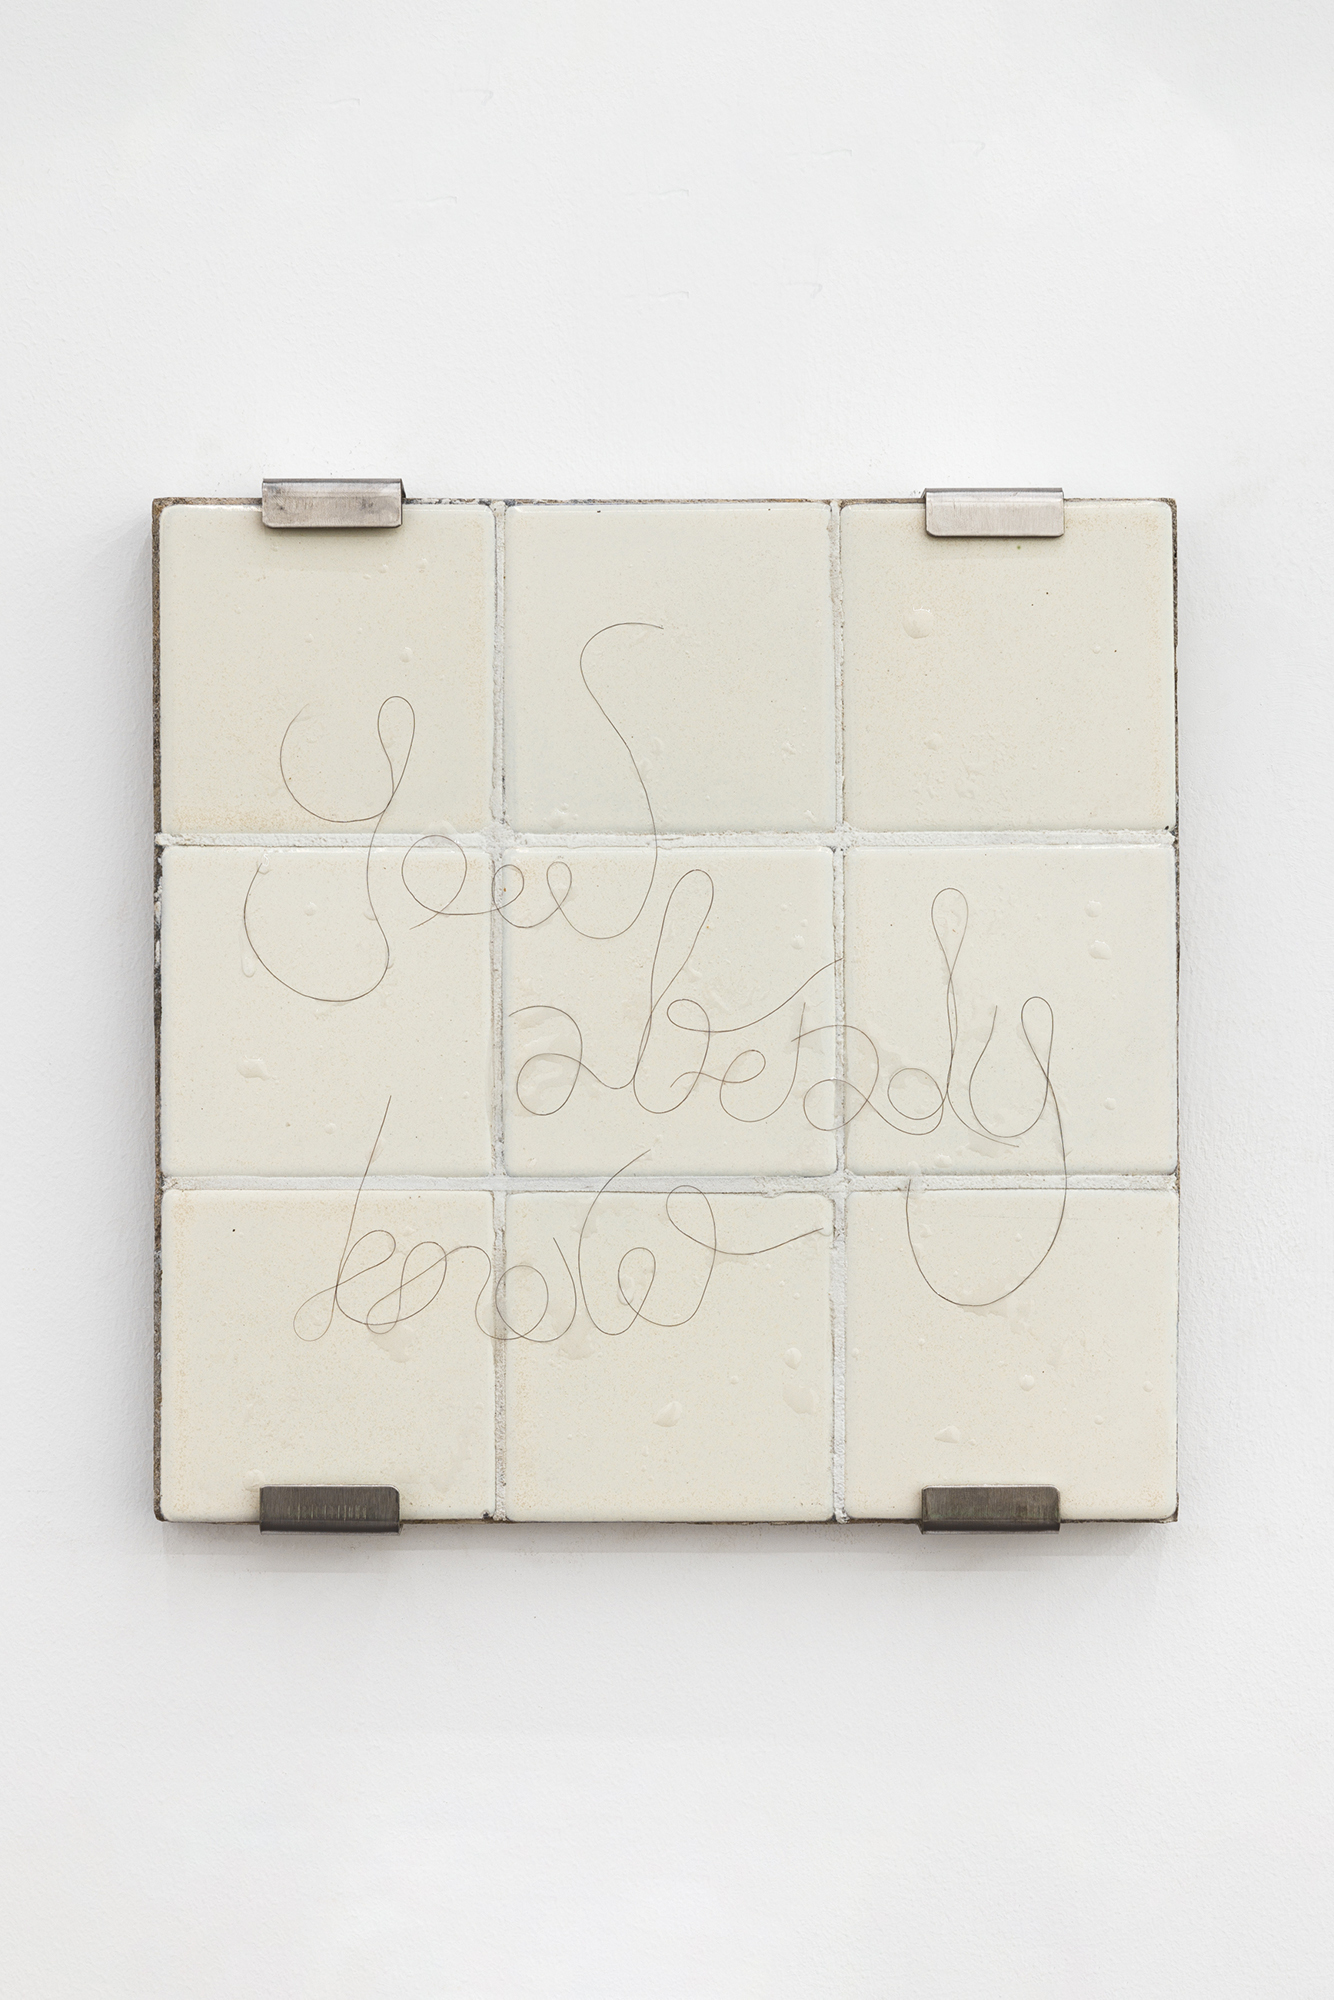 You Already Know, 2023, Cement, handmade tiles, epoxy colored sand, chicken wire, resin, artist's hair, 29.5 Ã— 29.5 Ã— 2.5 cm